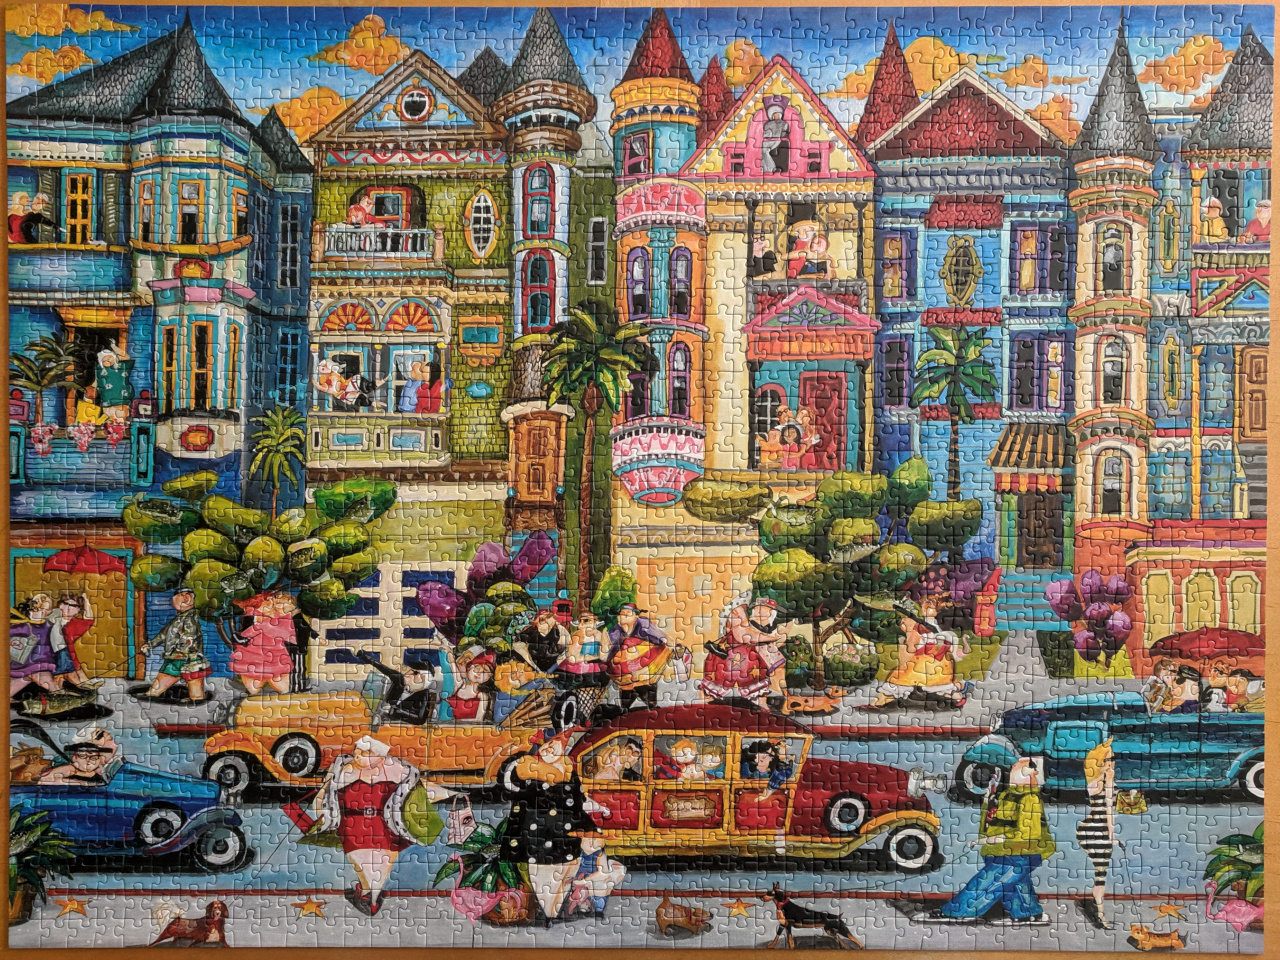 Puzzlebug 300 Piece Jigsaw Puzzle ~ Painted Ladies from Alamo Square 